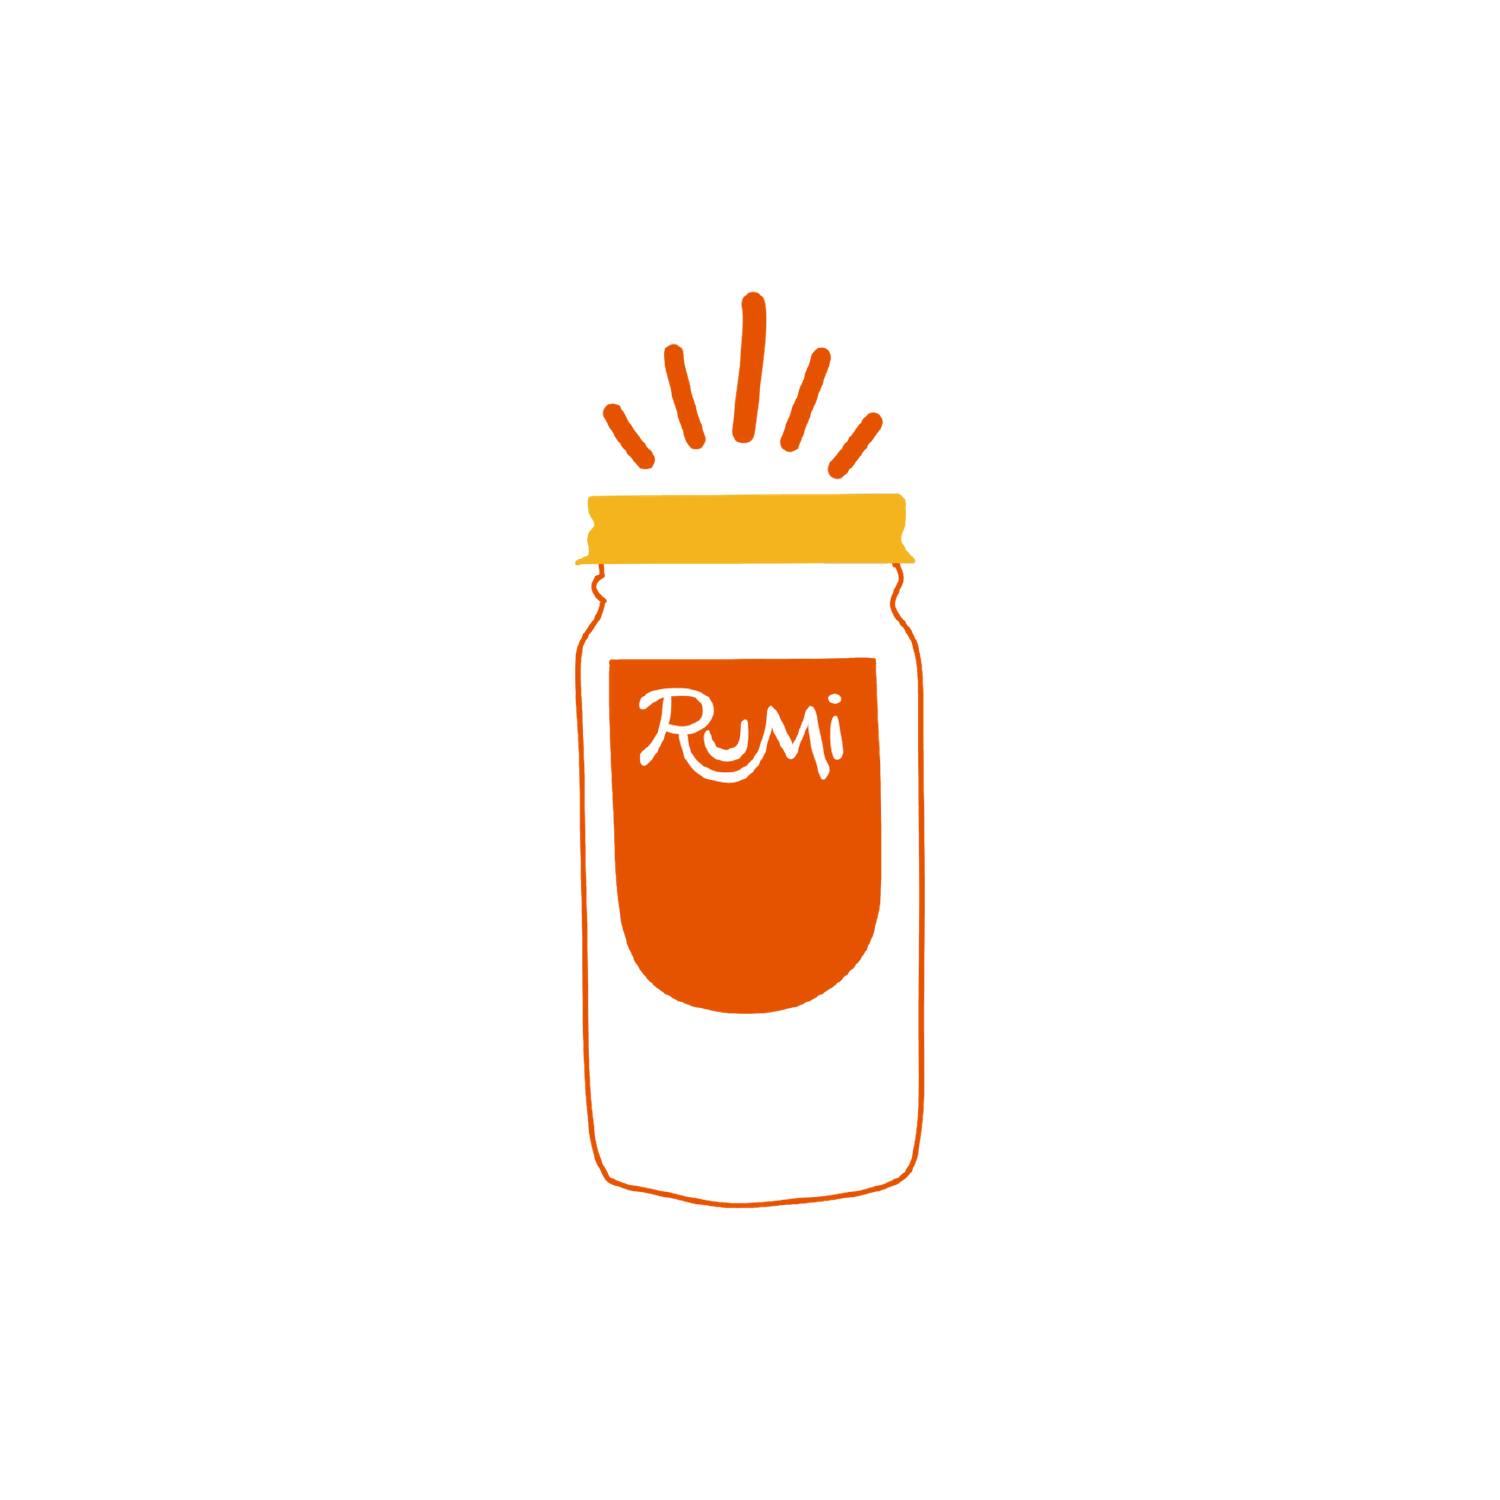 A delightful hand-drawn rendition of our signature Rumi Spice jar showcases our brand's essence.